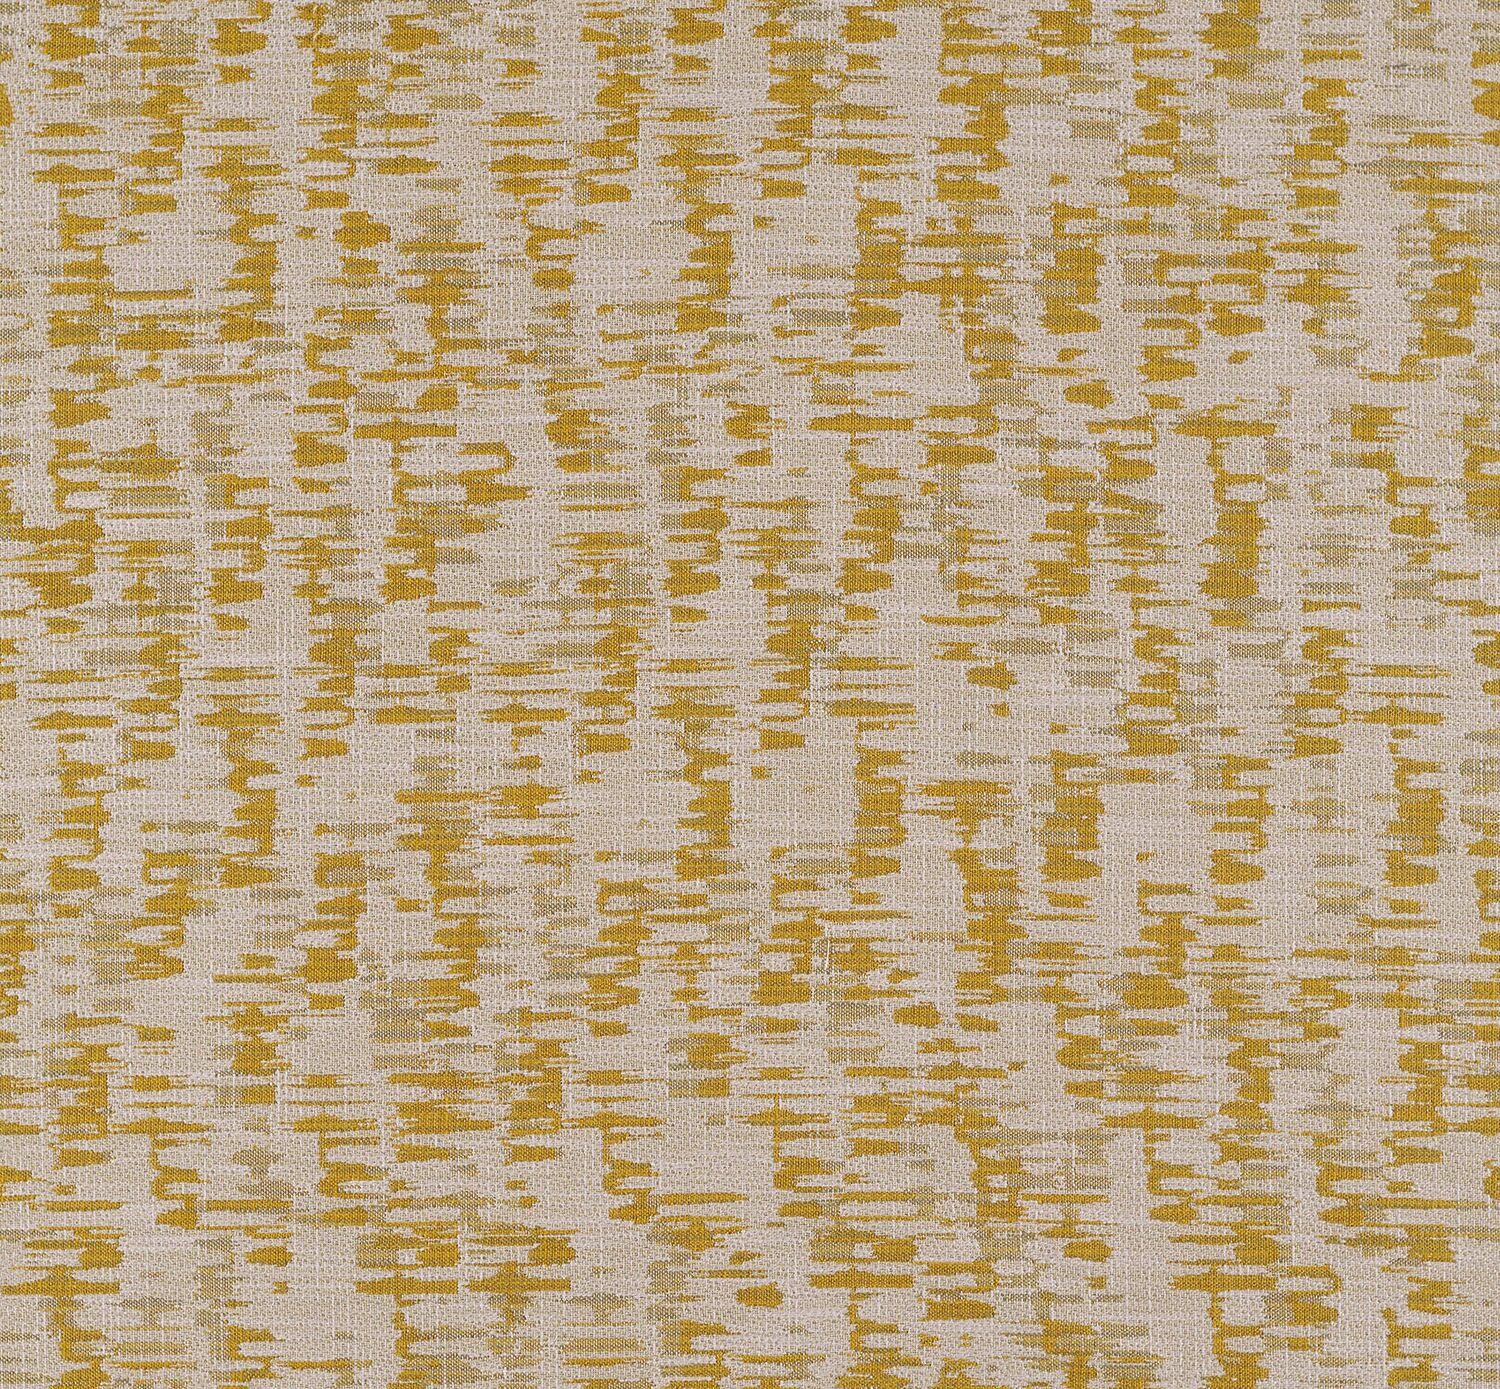 Wavefield - Aspen Reflection - 4091 - 04 Tileable Swatches